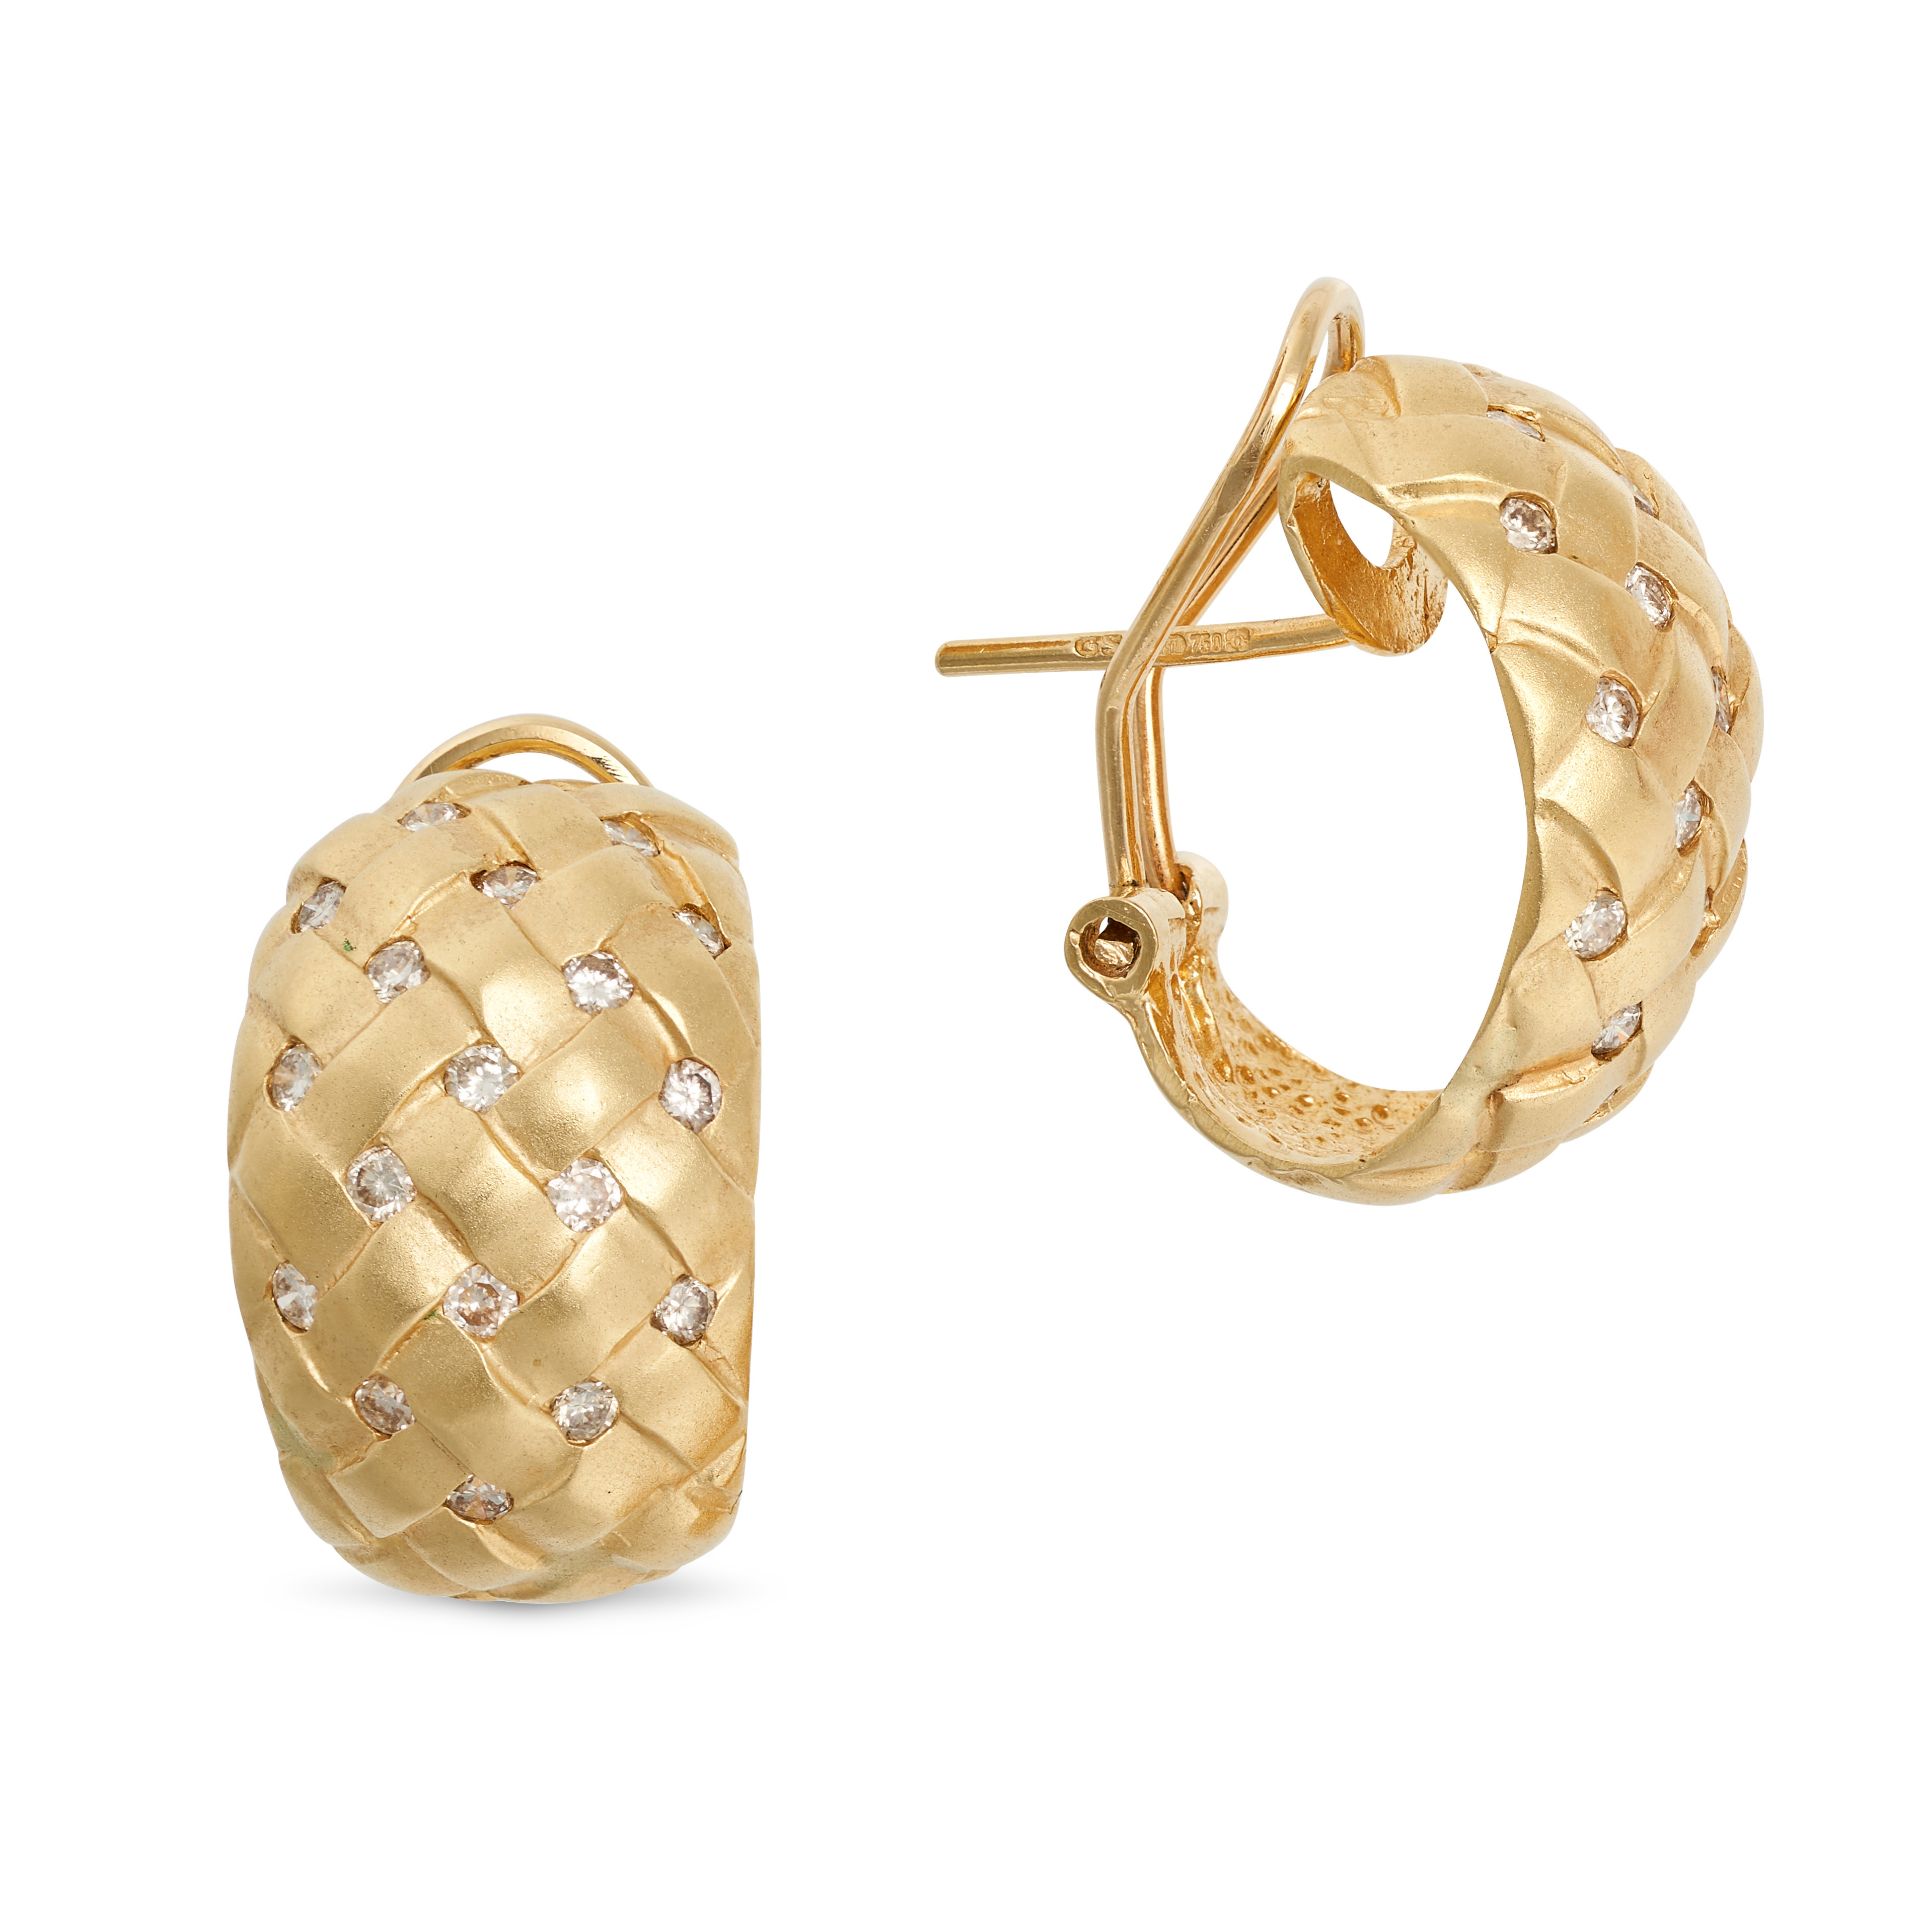 A PAIR OF DIAMOND HOOP EARRINGS in 18ct yellow gold, each in a woven design accented by round bri...